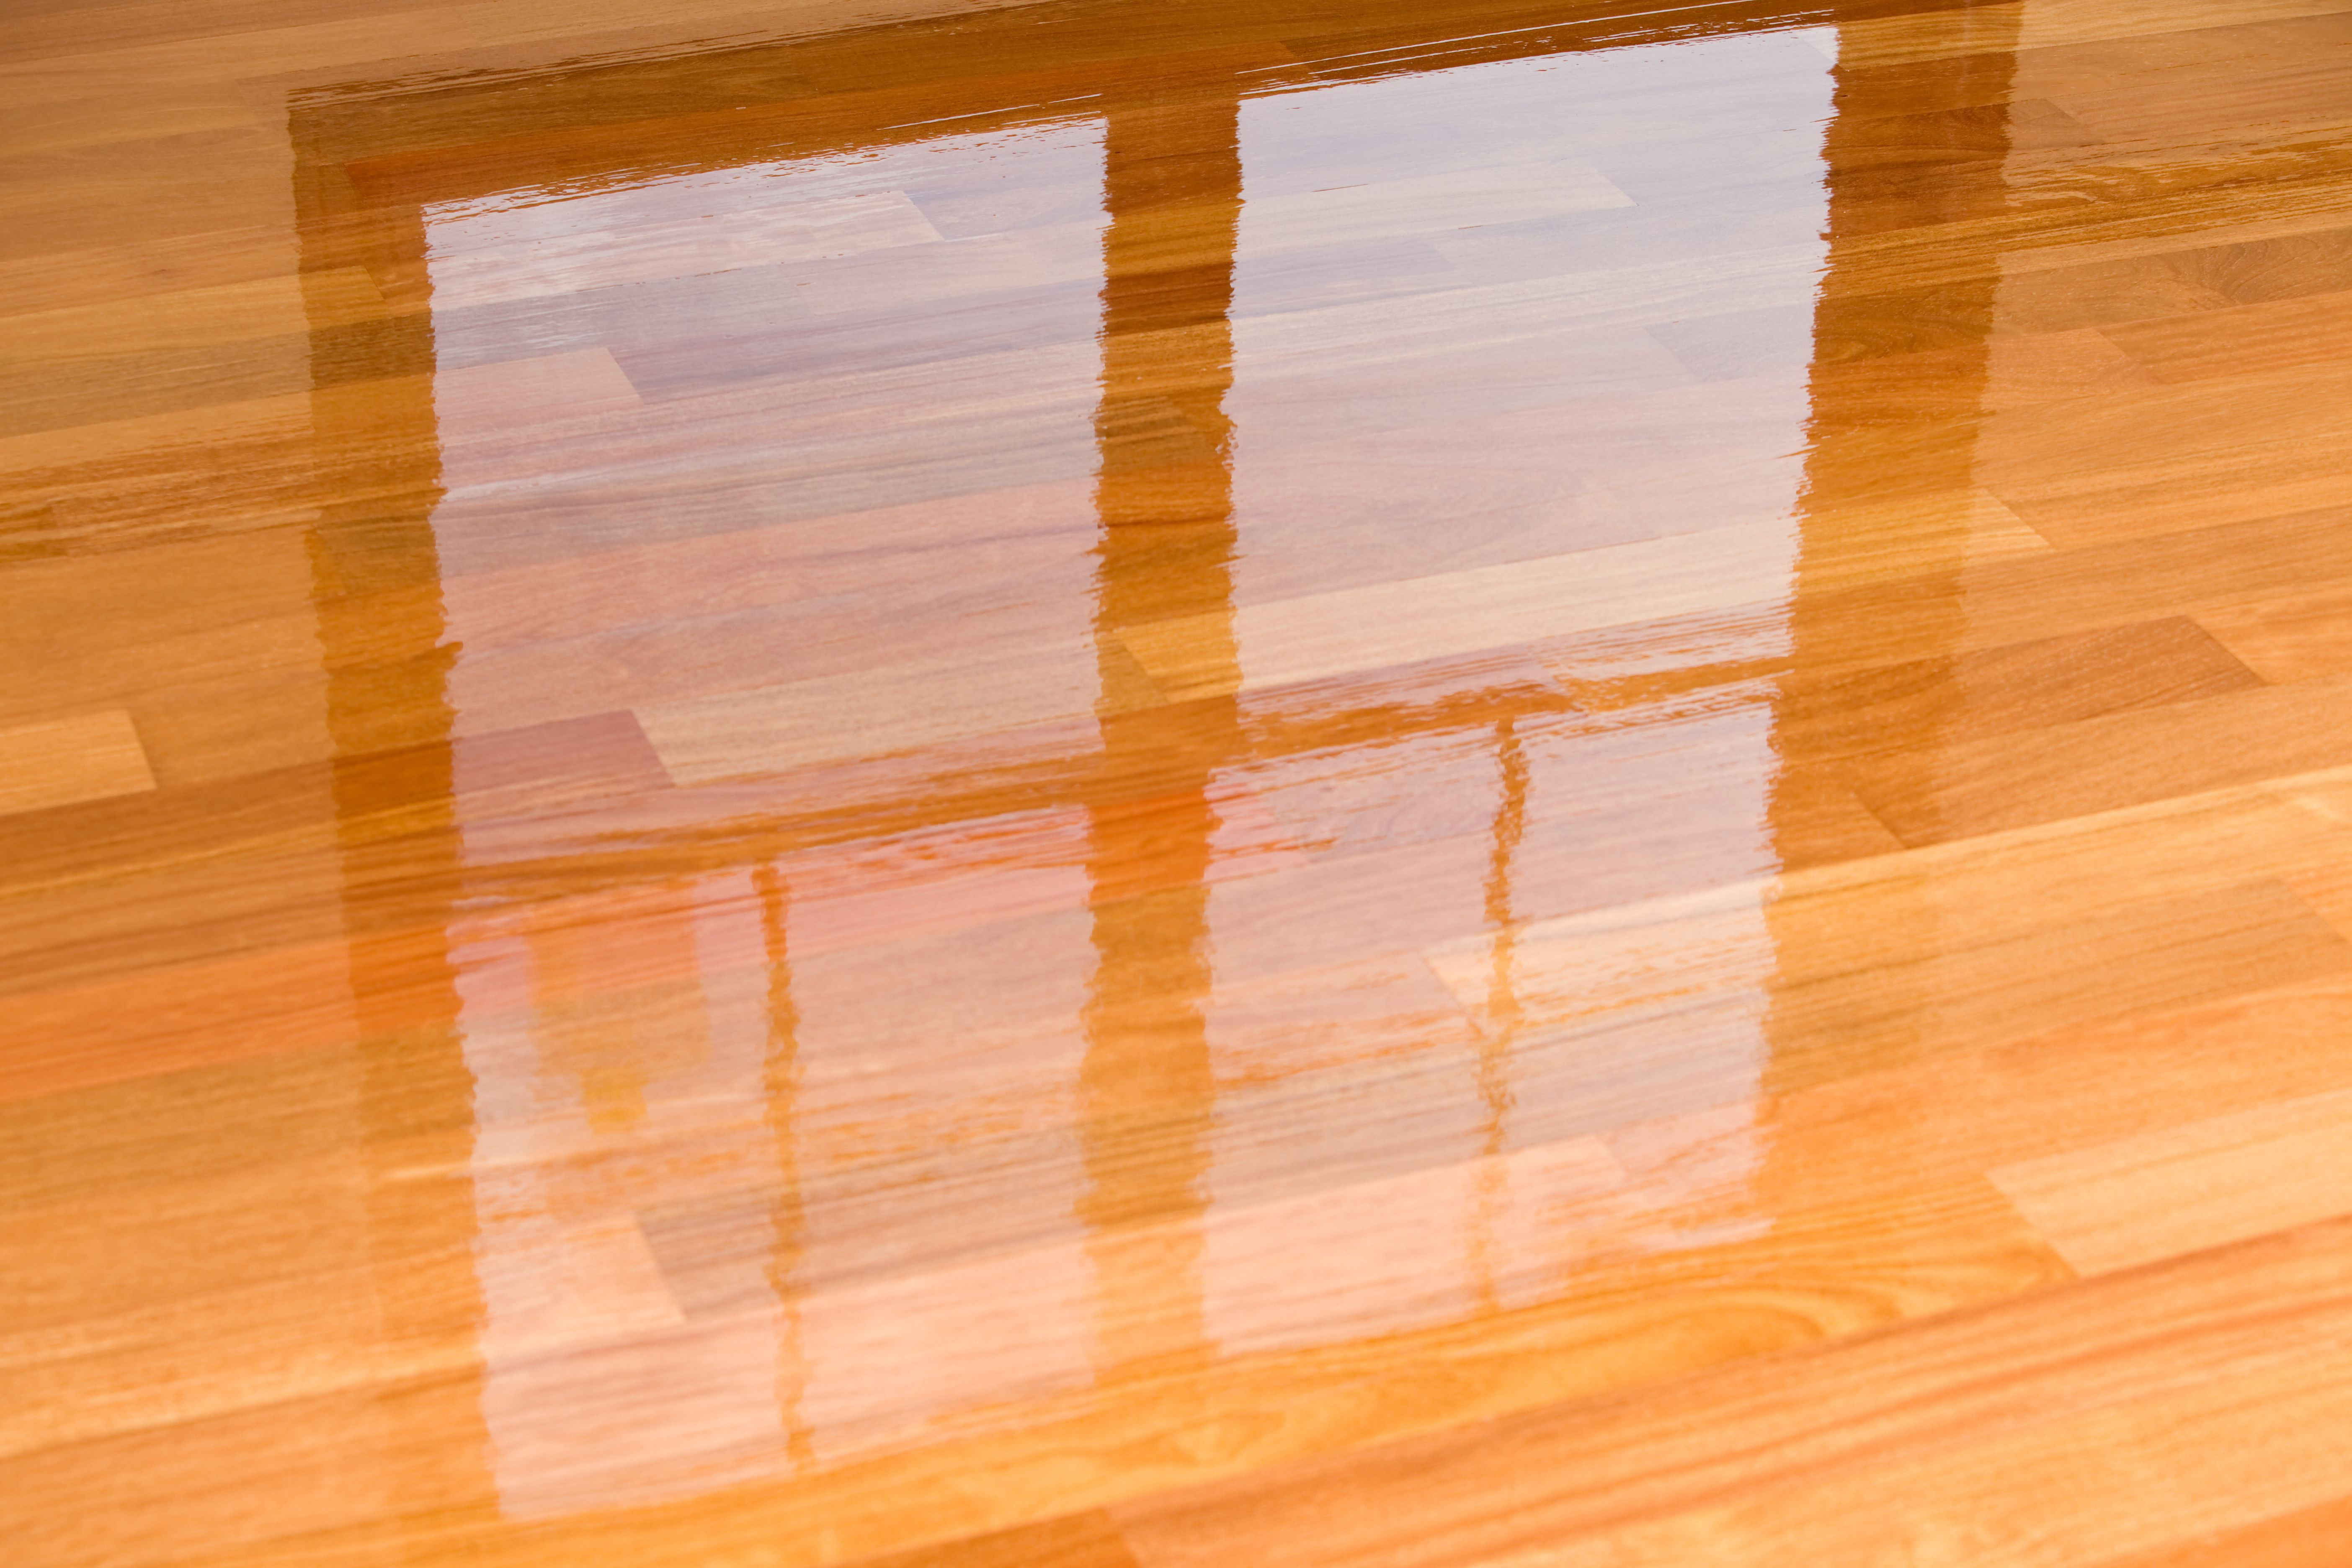 15 Famous Filling Small Gaps In Hardwood Floors 2024 free download filling small gaps in hardwood floors of guide to laminate flooring water and damage repair with wet polyurethane on new hardwood floor with window reflection 183846705 582e34da3df78c6f6a403